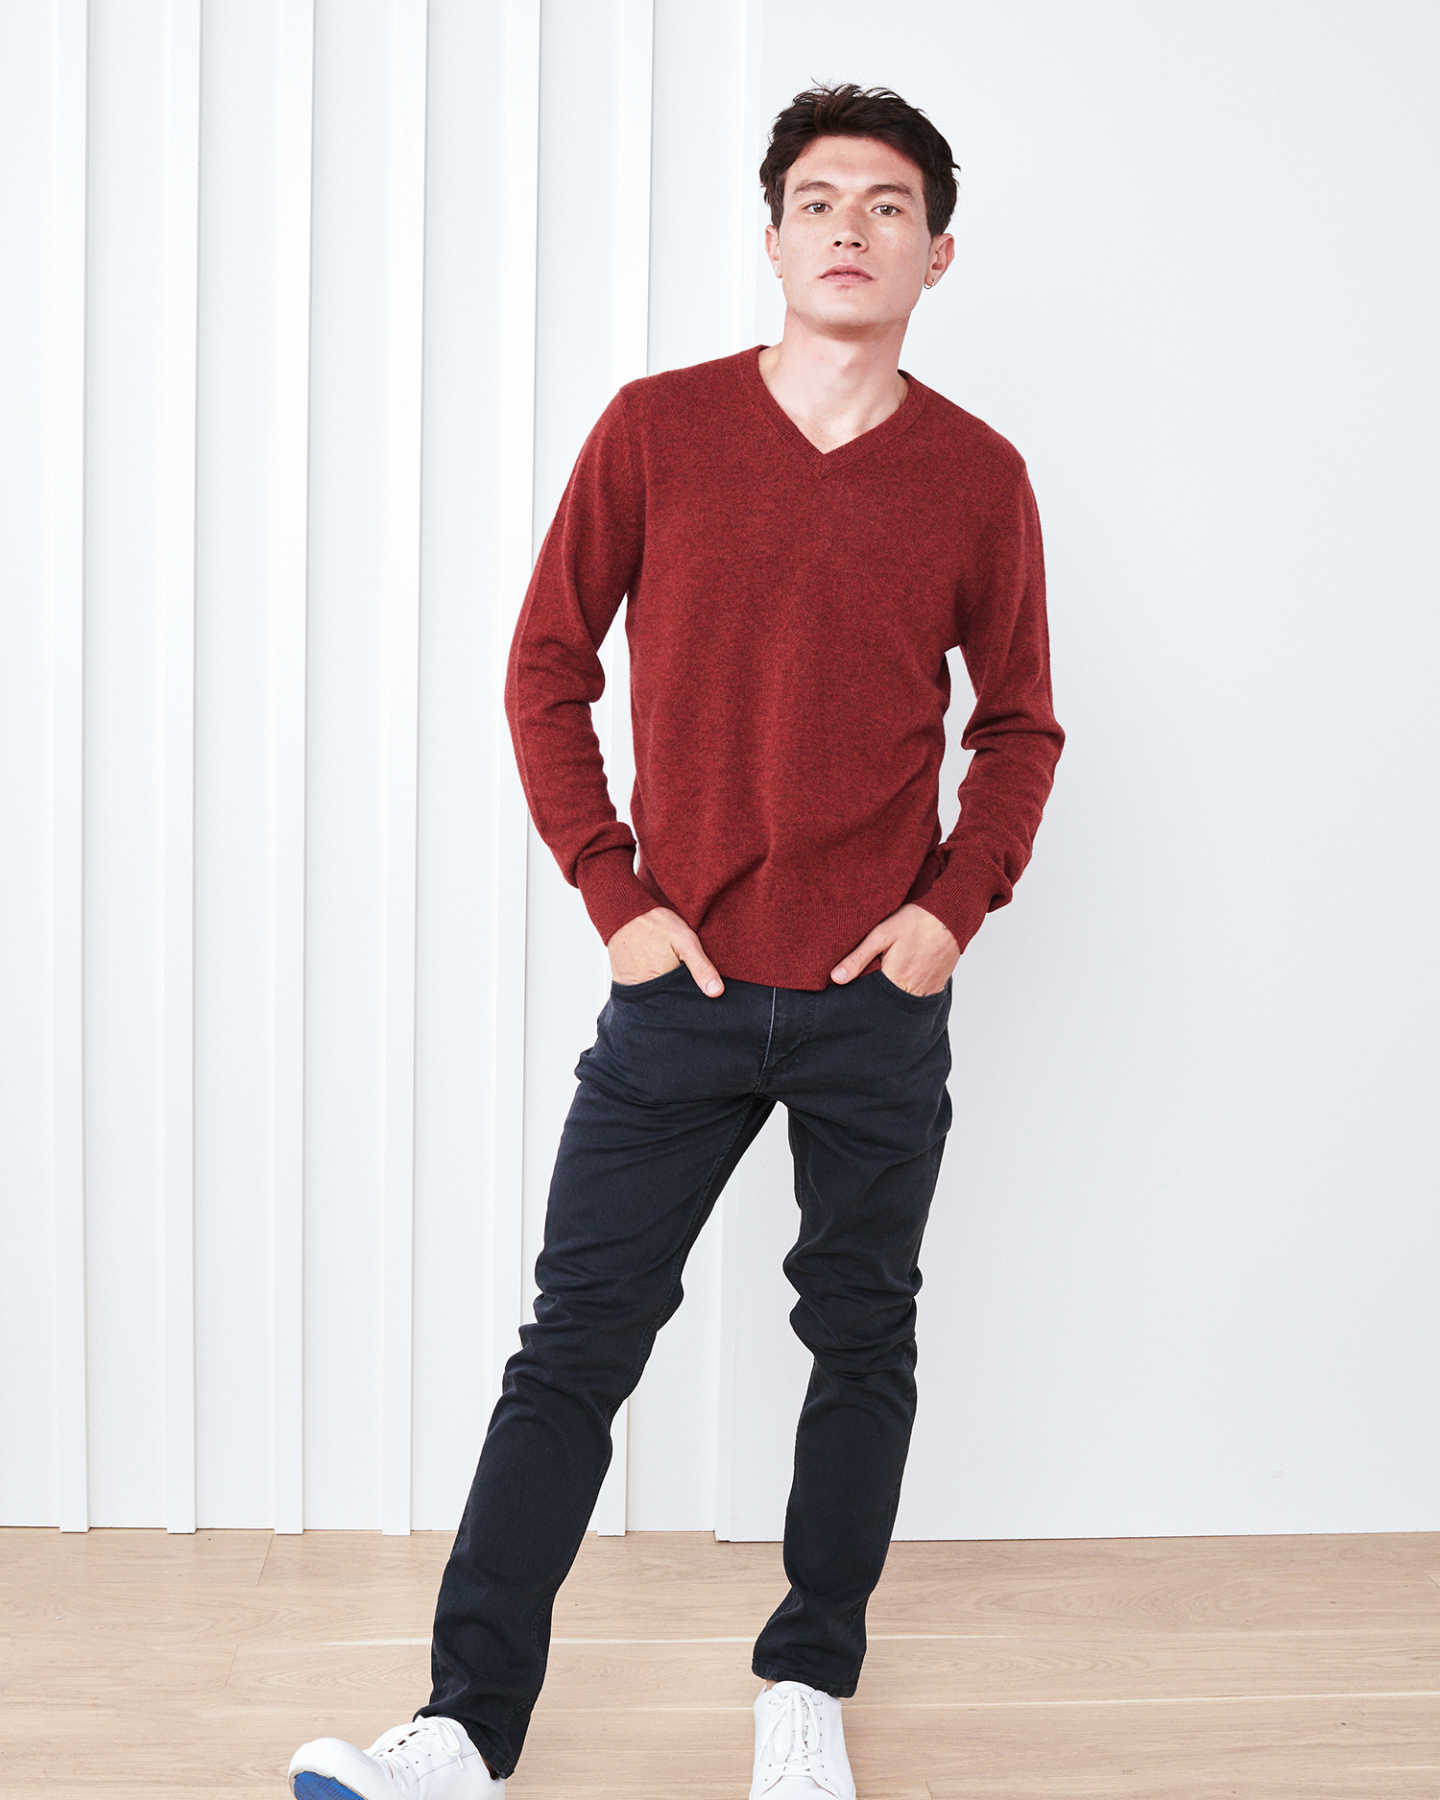 Man wearing red cashmere v-neck sweater for men standing